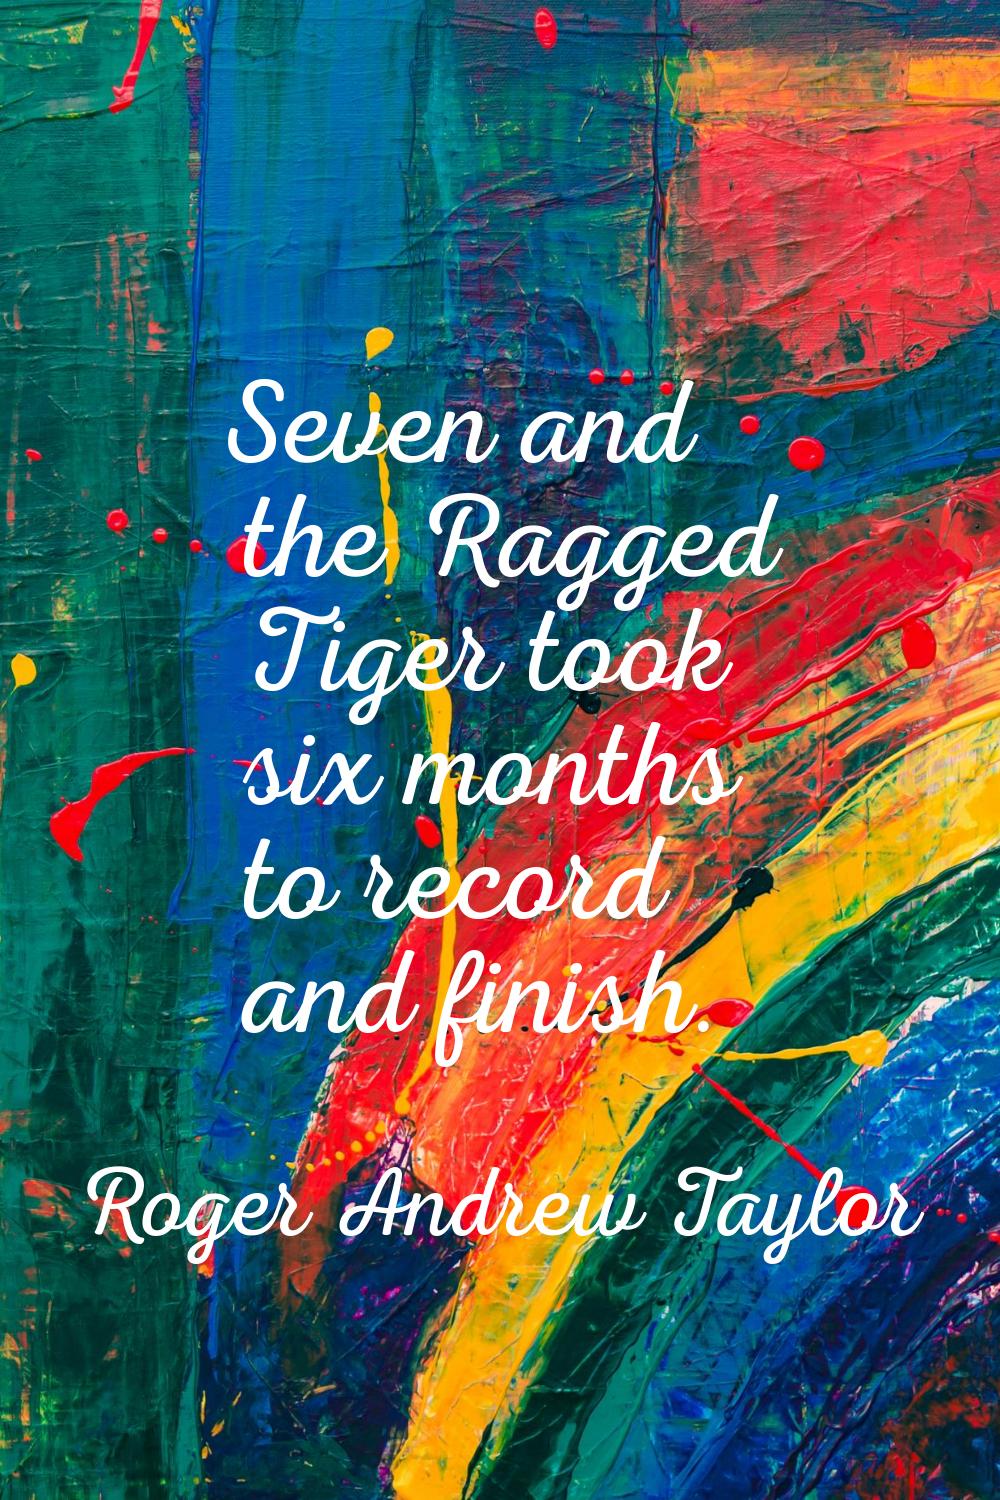 Seven and the Ragged Tiger took six months to record and finish.